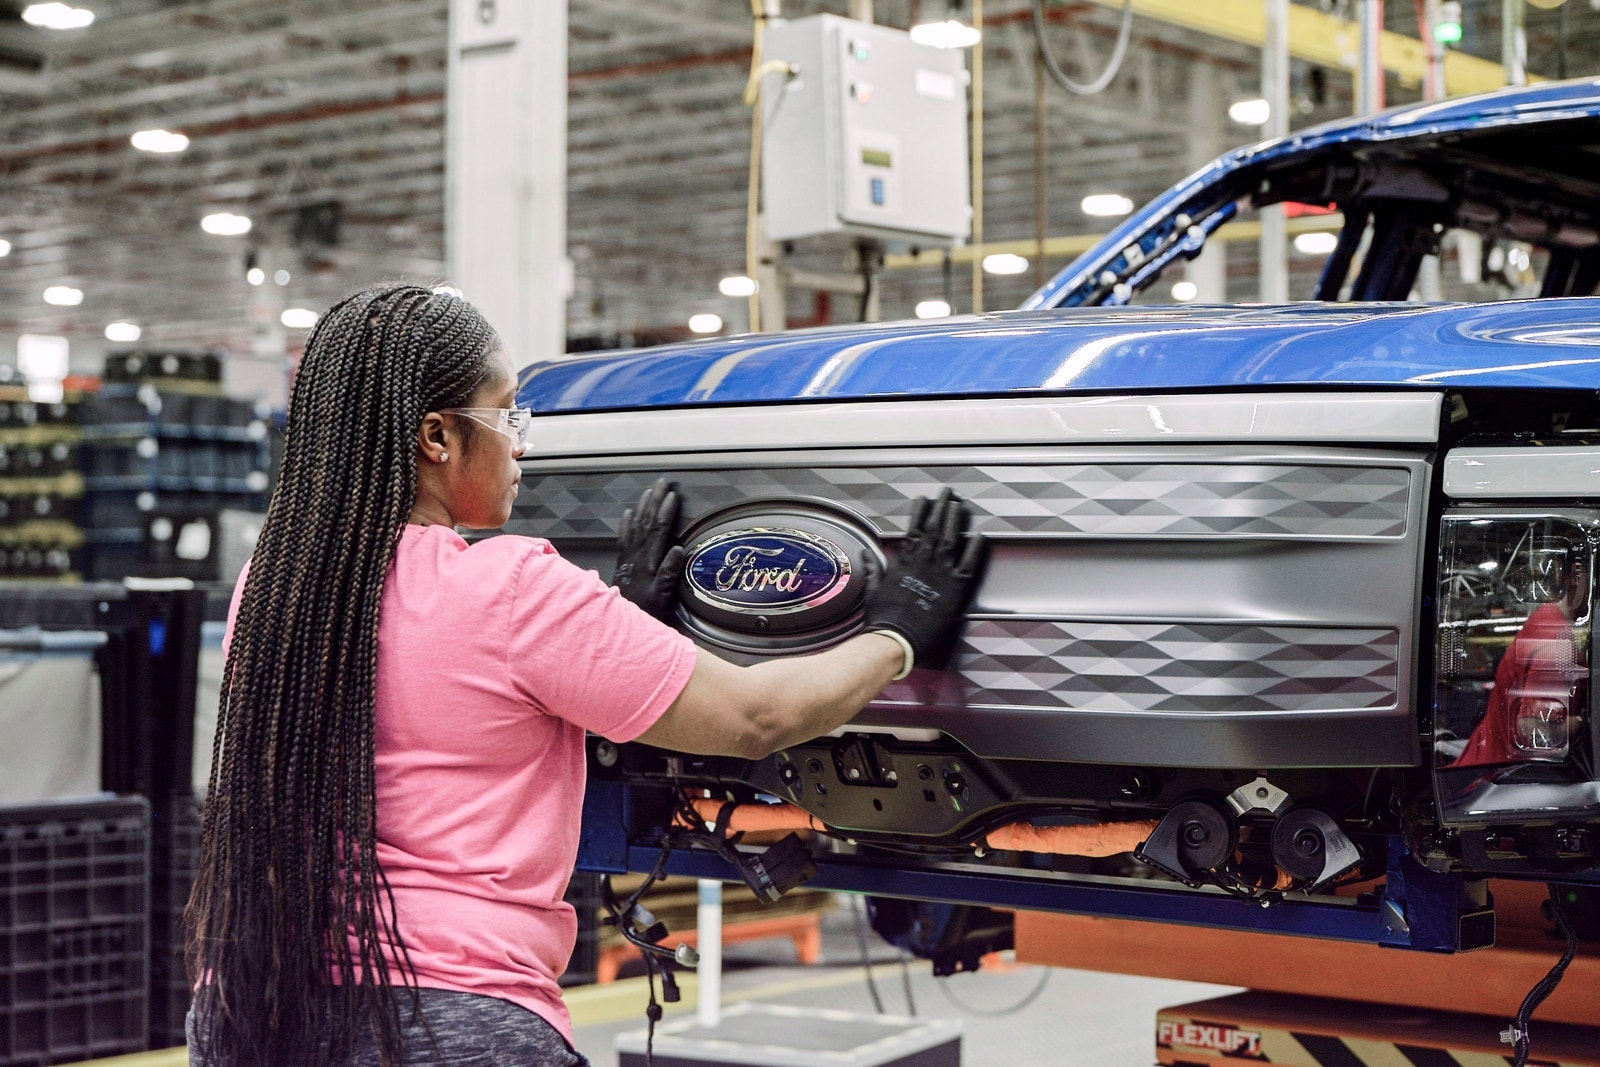 Ford F-150 Lightning being built on production line